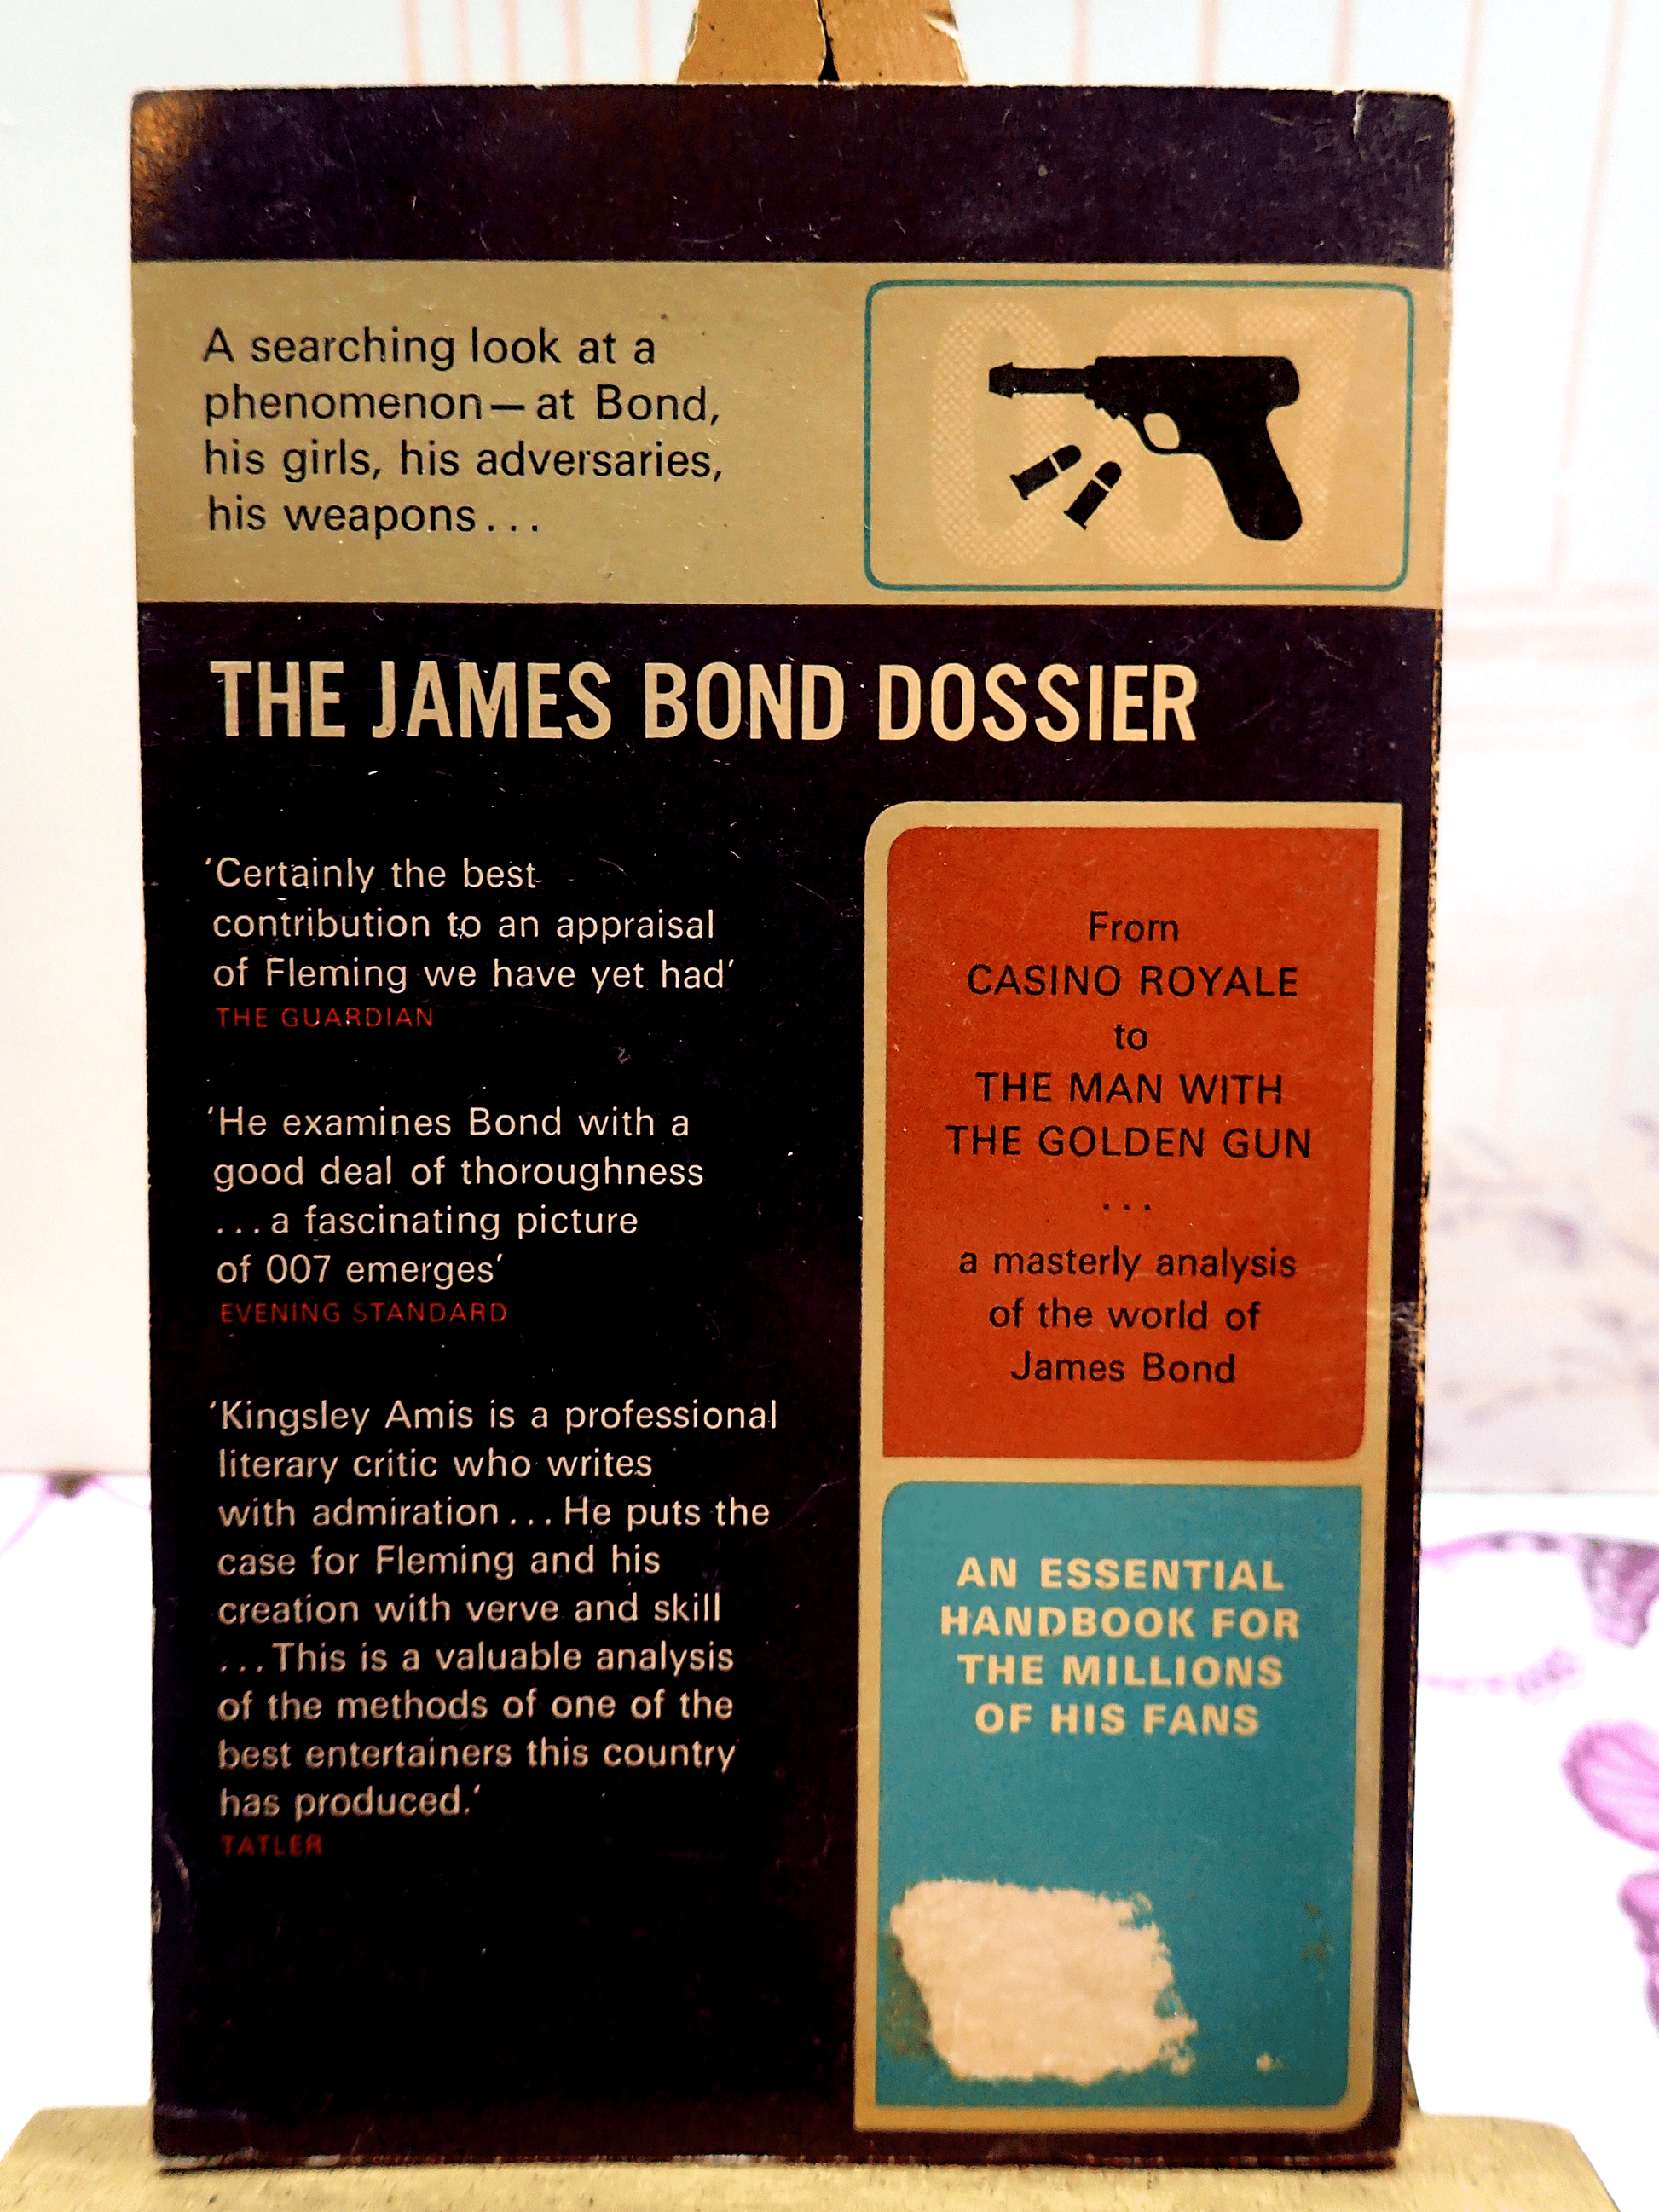 Back Cover of The James Bond Dossier Kingsley Amis Vintage Pan Paperback showing blurb and silhouette of a revolver